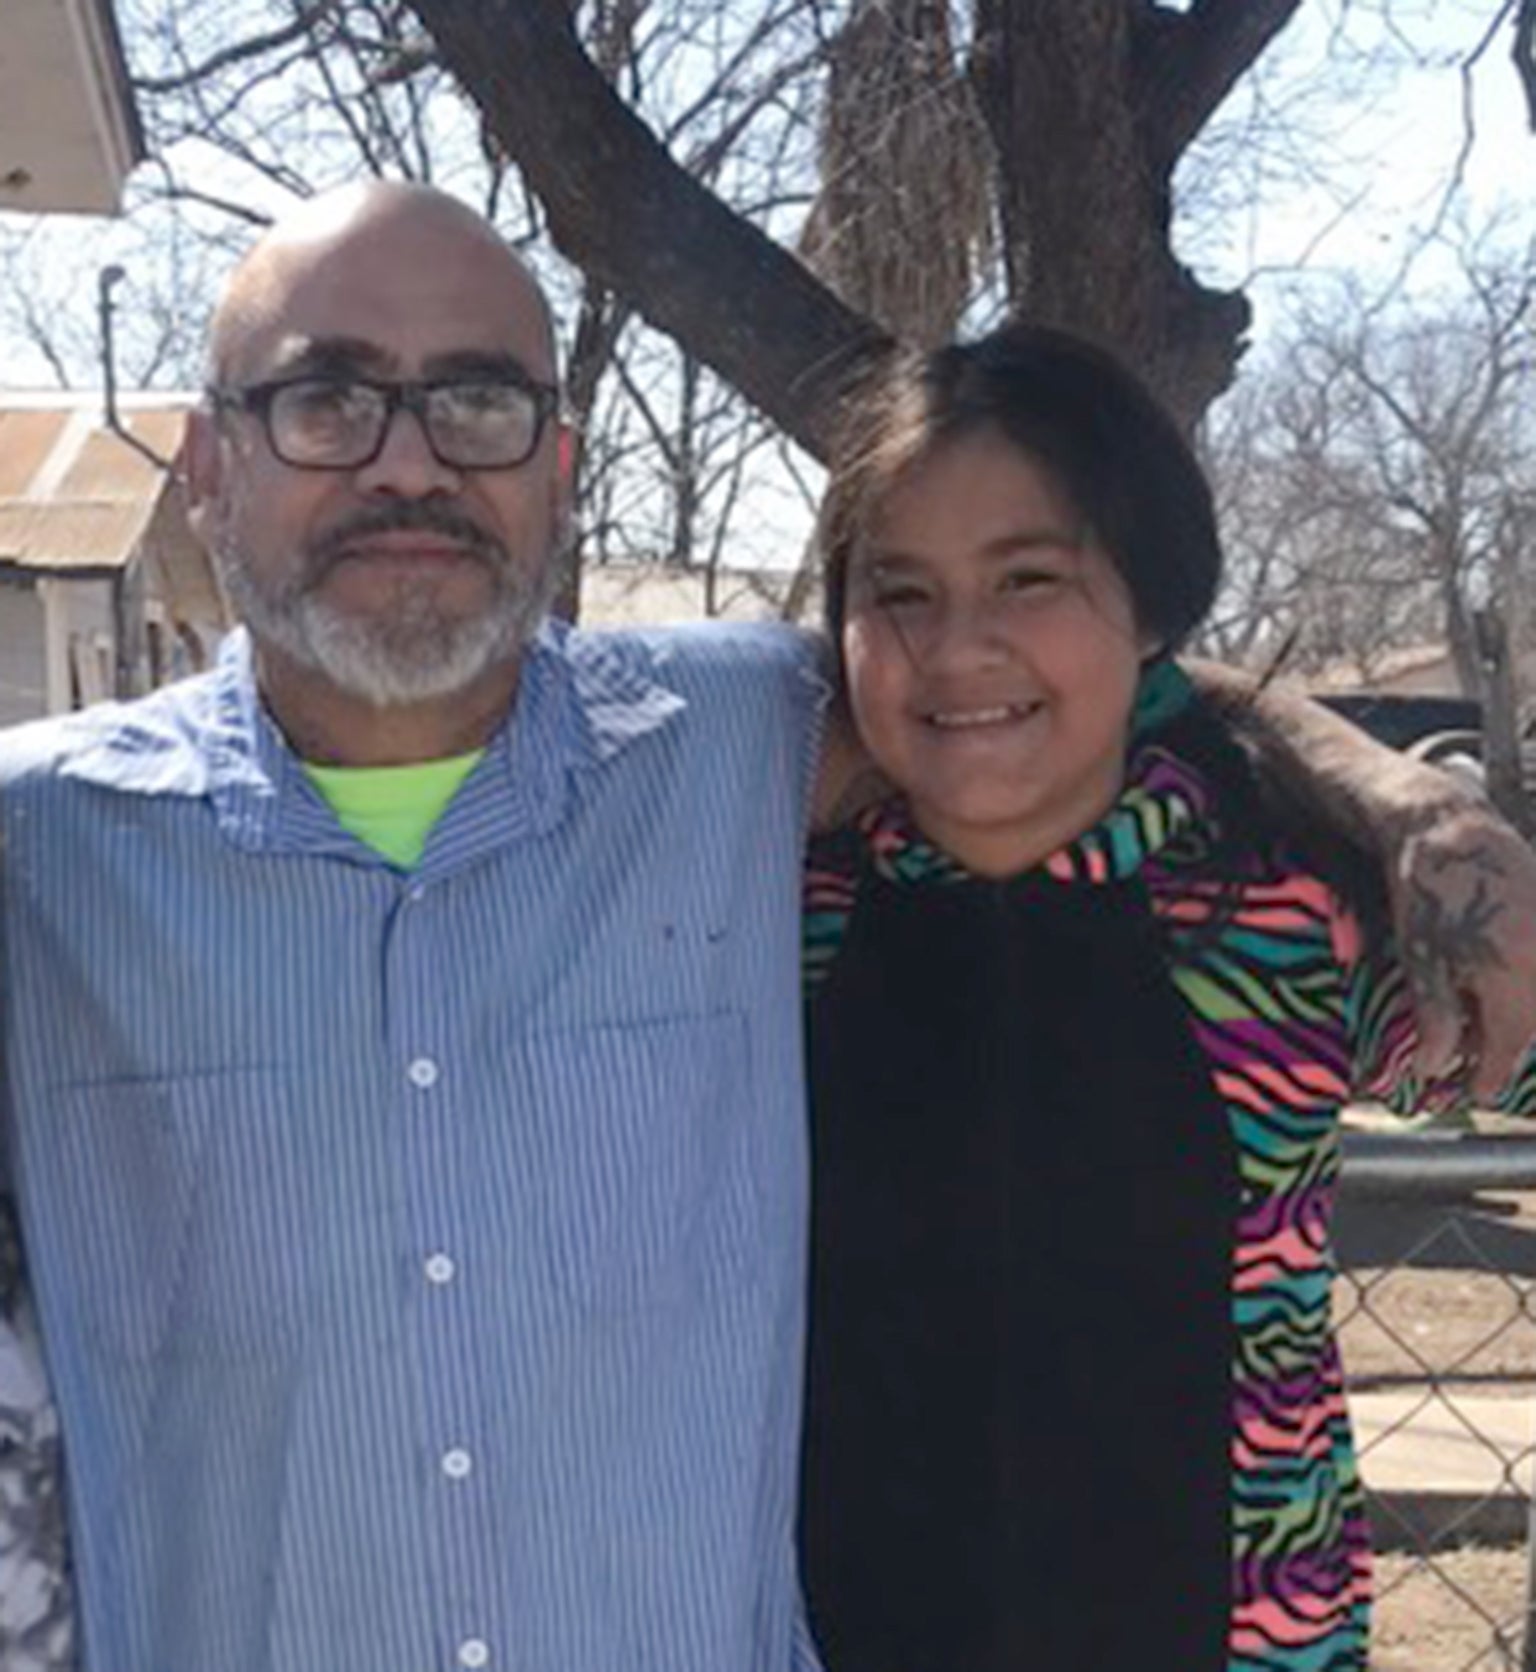 Jessie Rodriguez, 53, poses with his daughter, Annabell, 10, who was killed last week in the Uvalde elementary school massacre